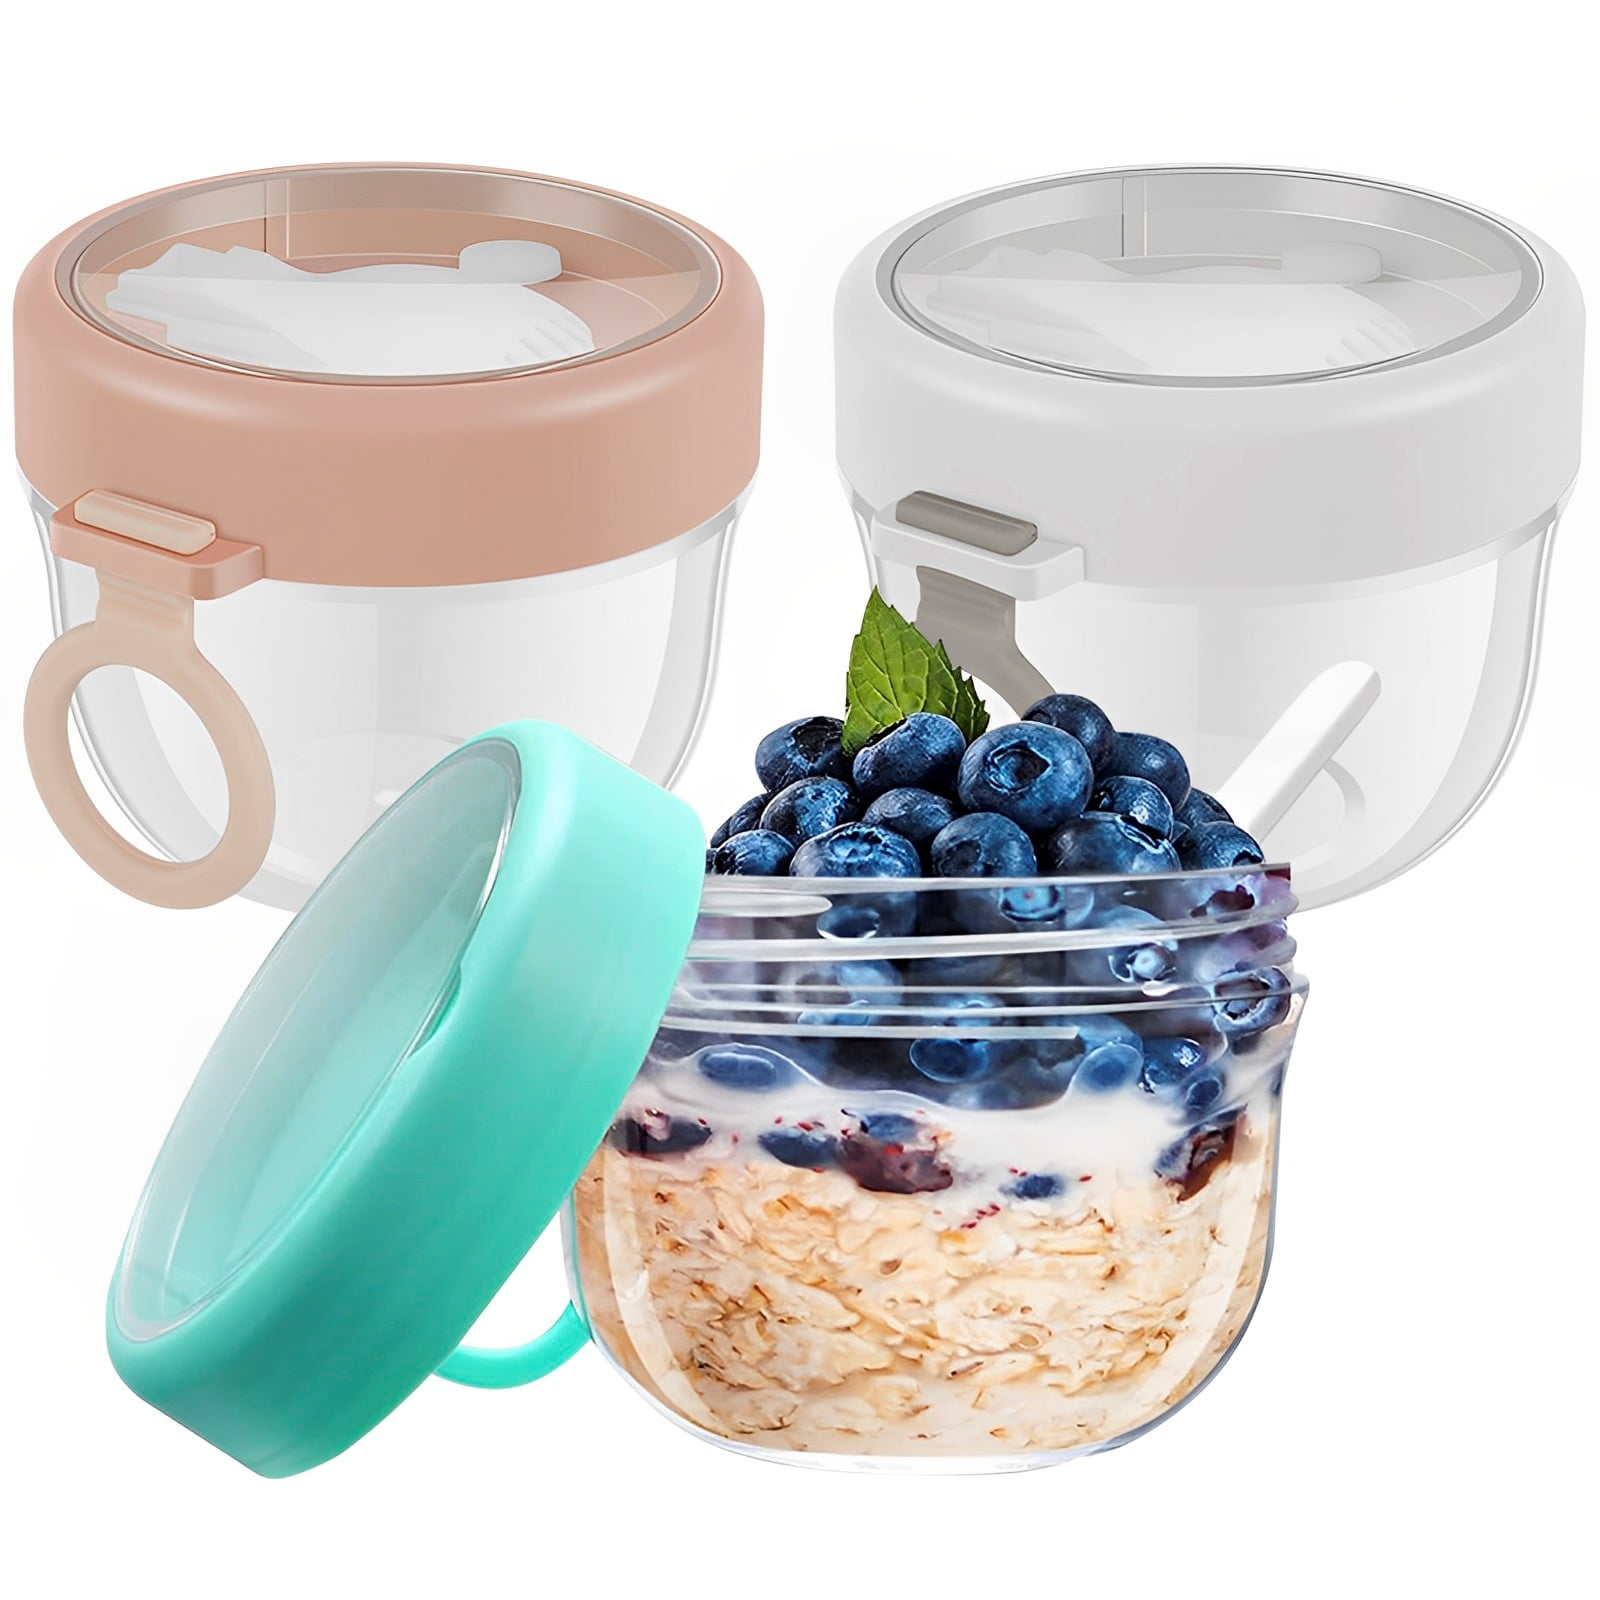 Komax Biokips Overnight Oats Containers with Lids Set of 4 - Round Airtight Food Storage Containers for Oatmeal, Cereal, Milk & More - BPA-Free Meal